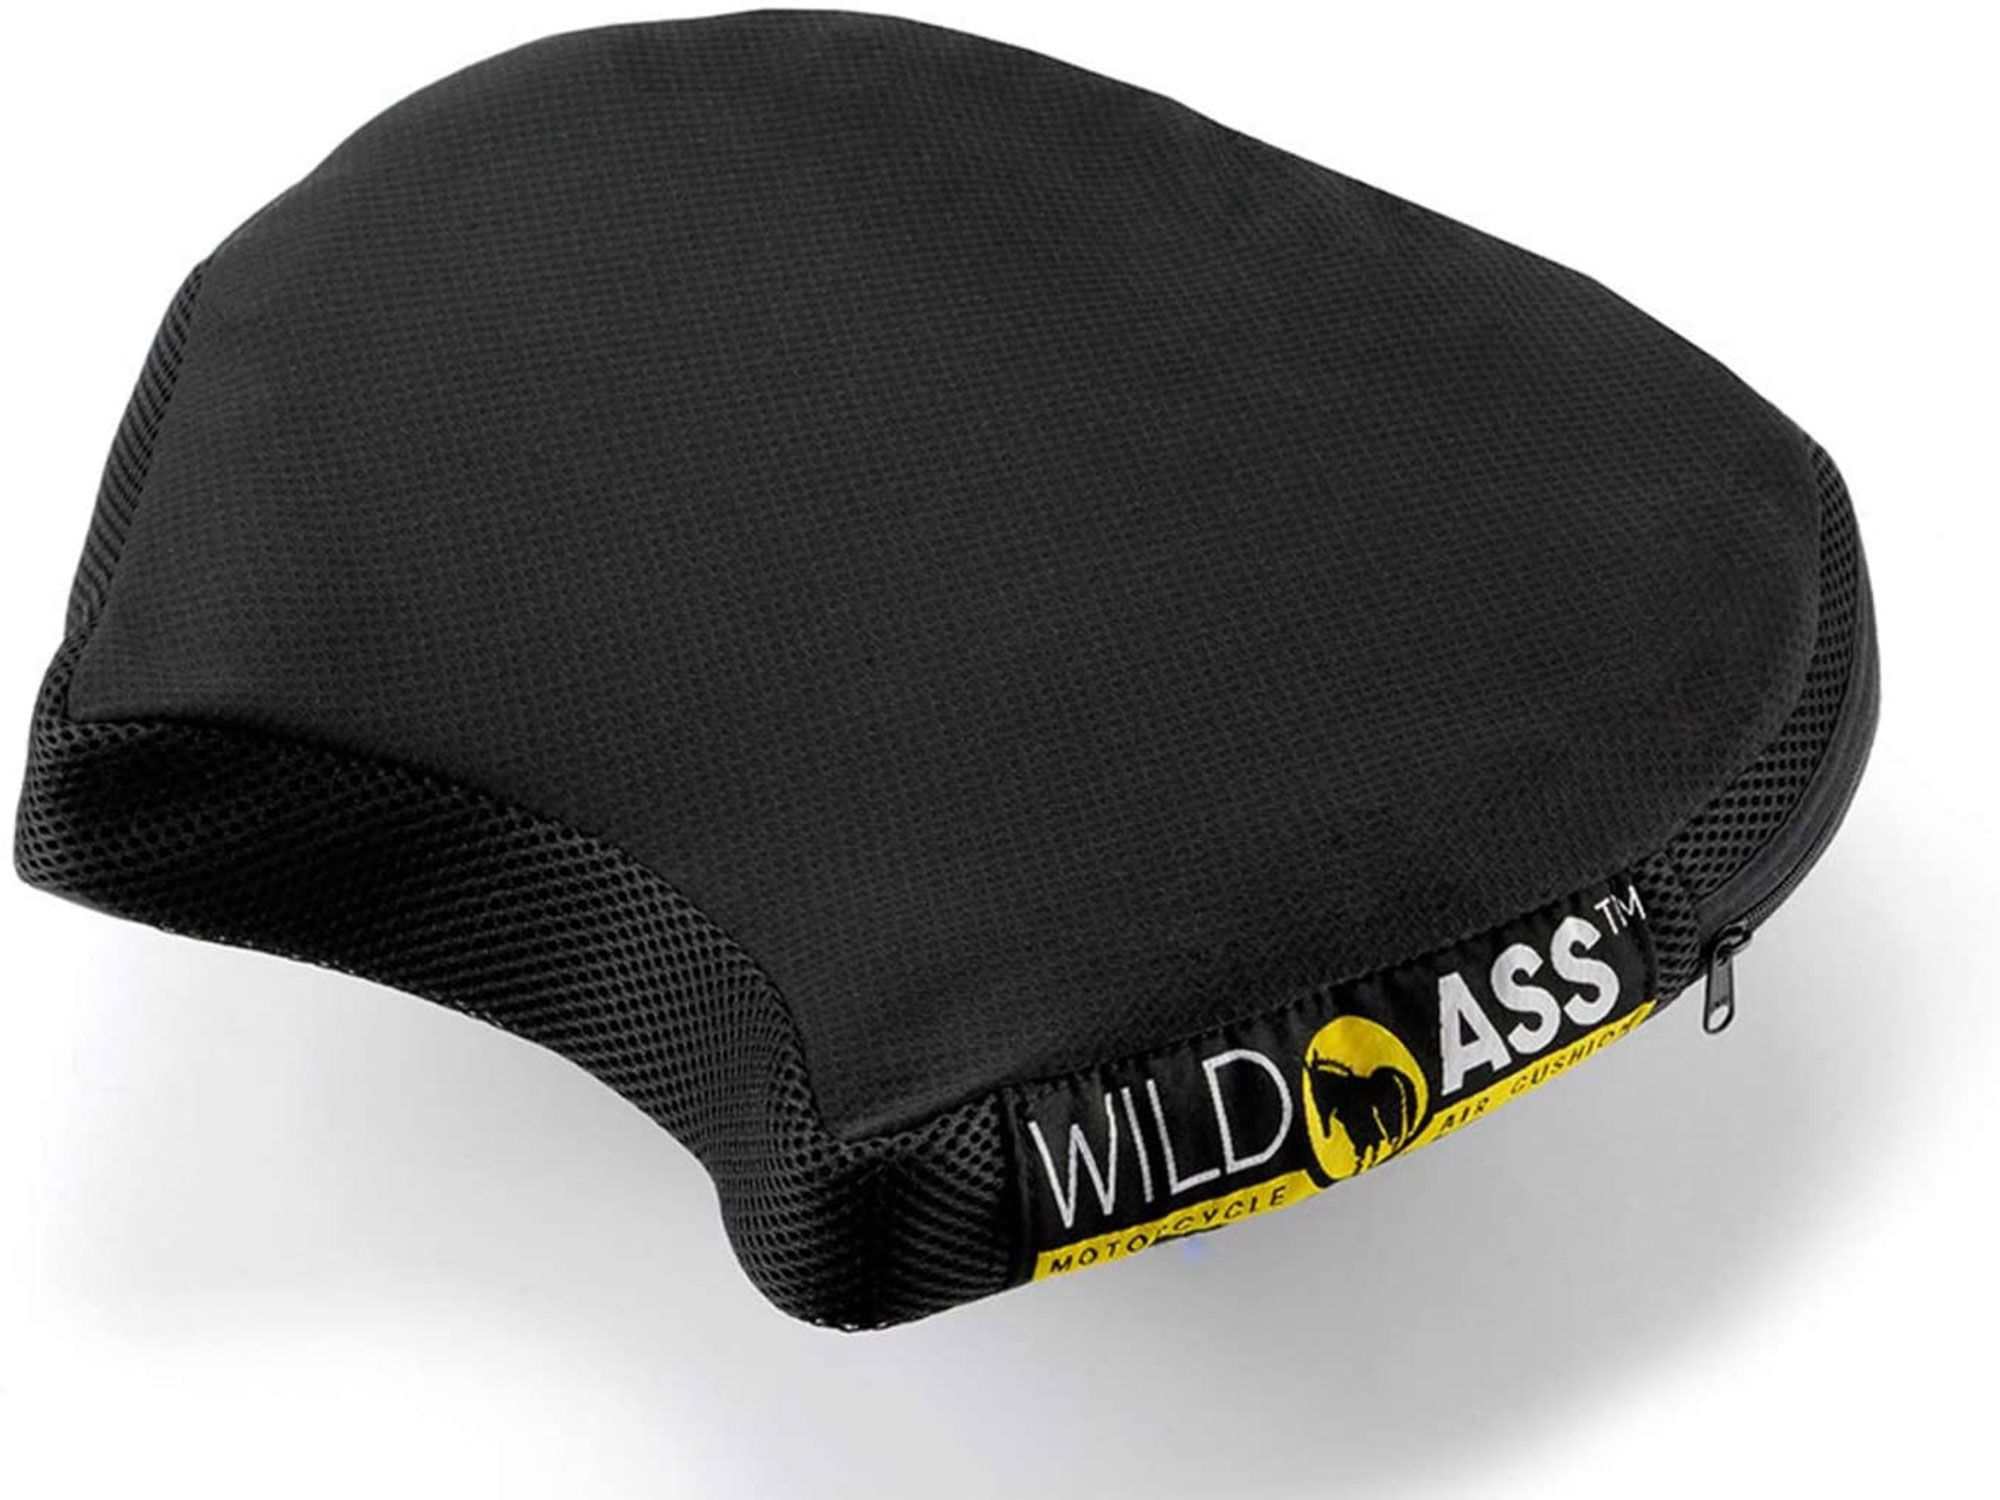 Elevate your mom’s comfort on the bike with this universal-fit Wild Ass Smart Air Gel seat cushion.